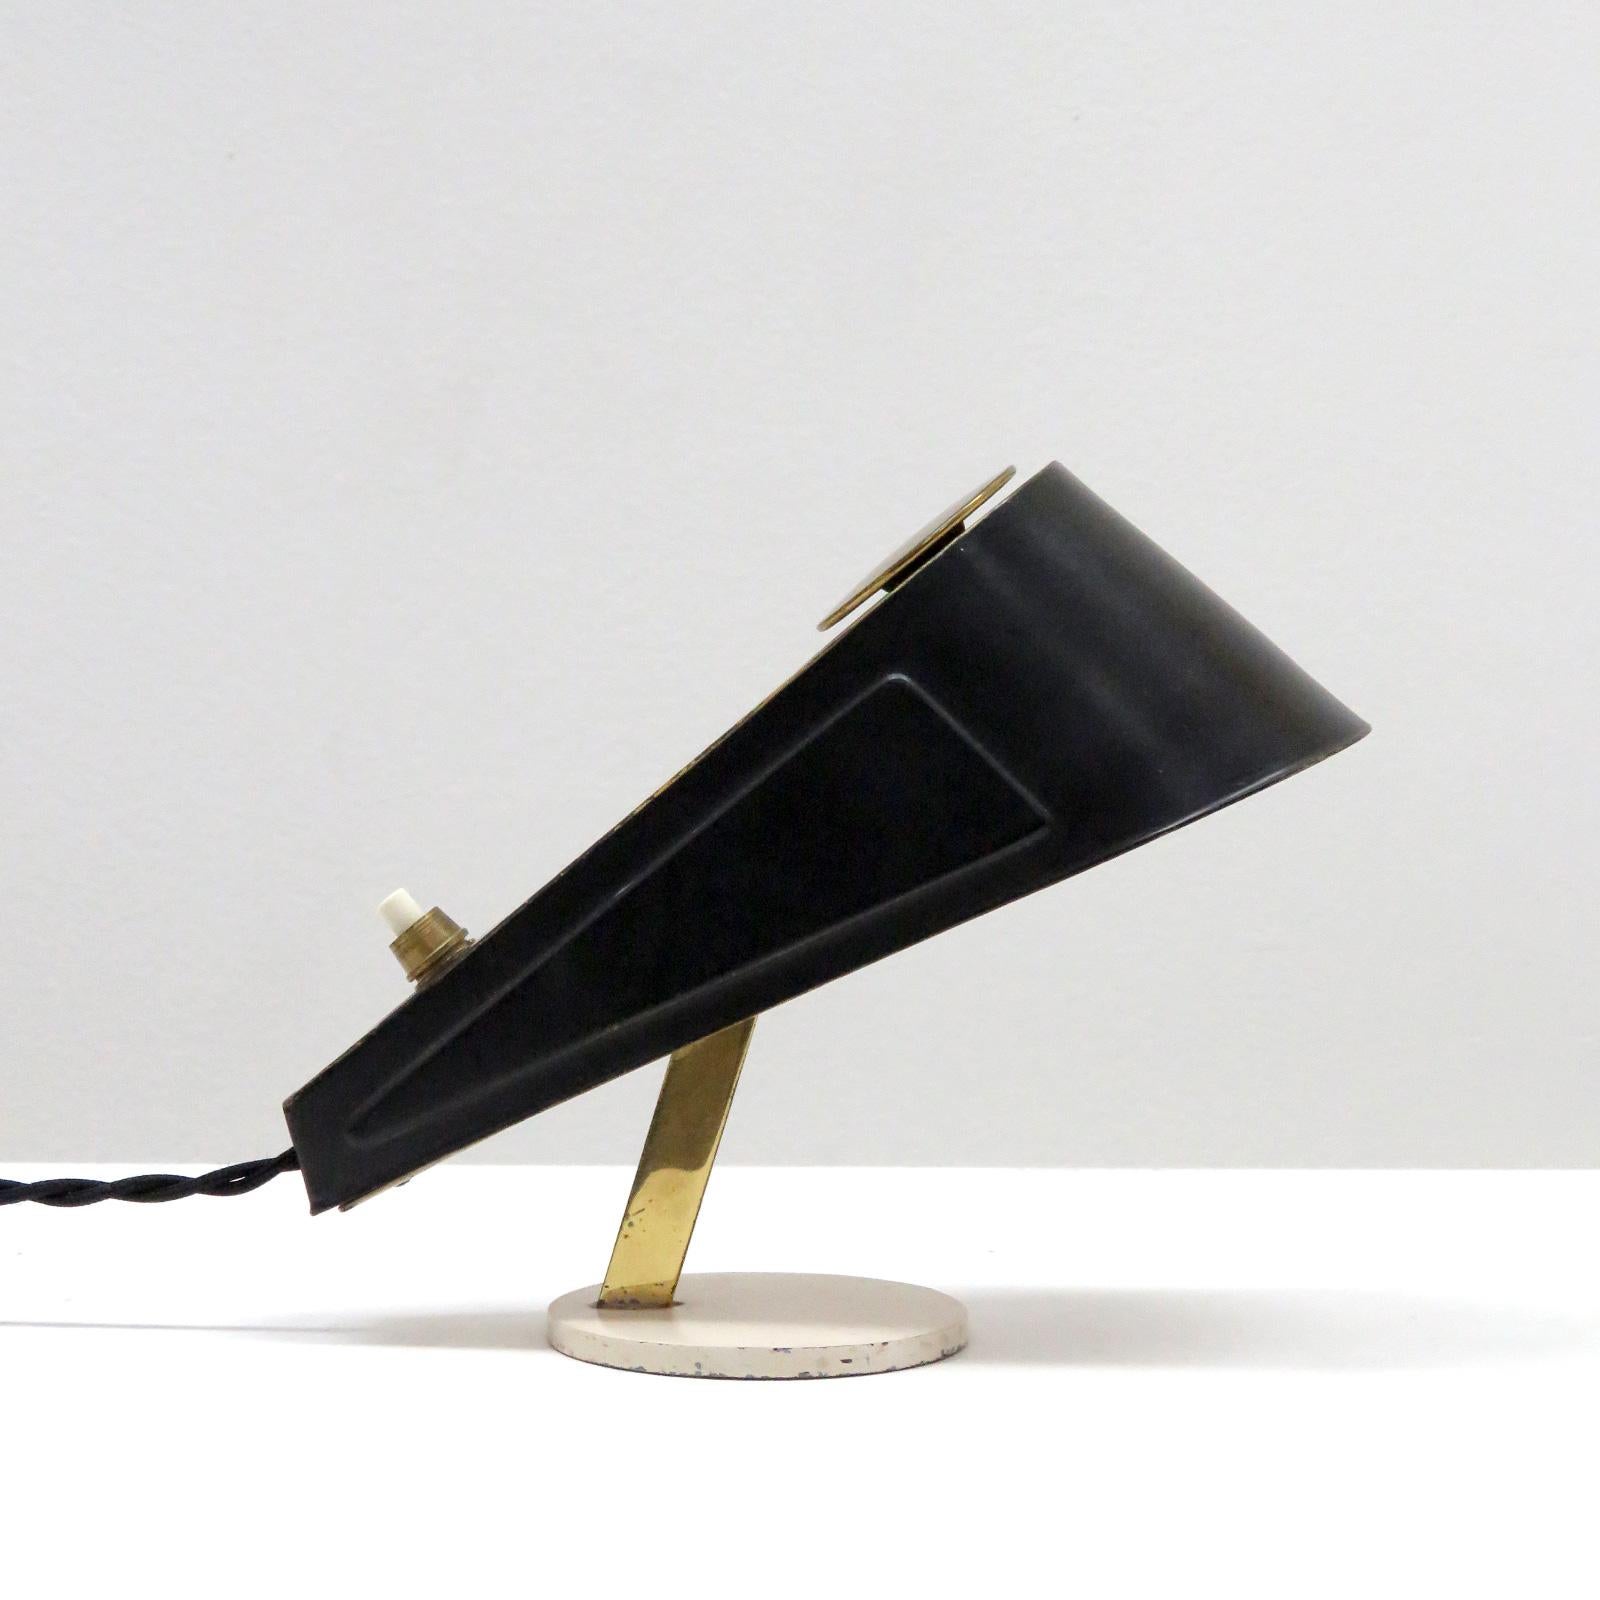 Unique petite Italian table lamp from the 1960s in brass and black and off-white enameled metal, on/off switch at rear of the adjustable body. Wired for US standards, one E12 socket, max. wattage 60w, bulb provided as a one time courtesy.